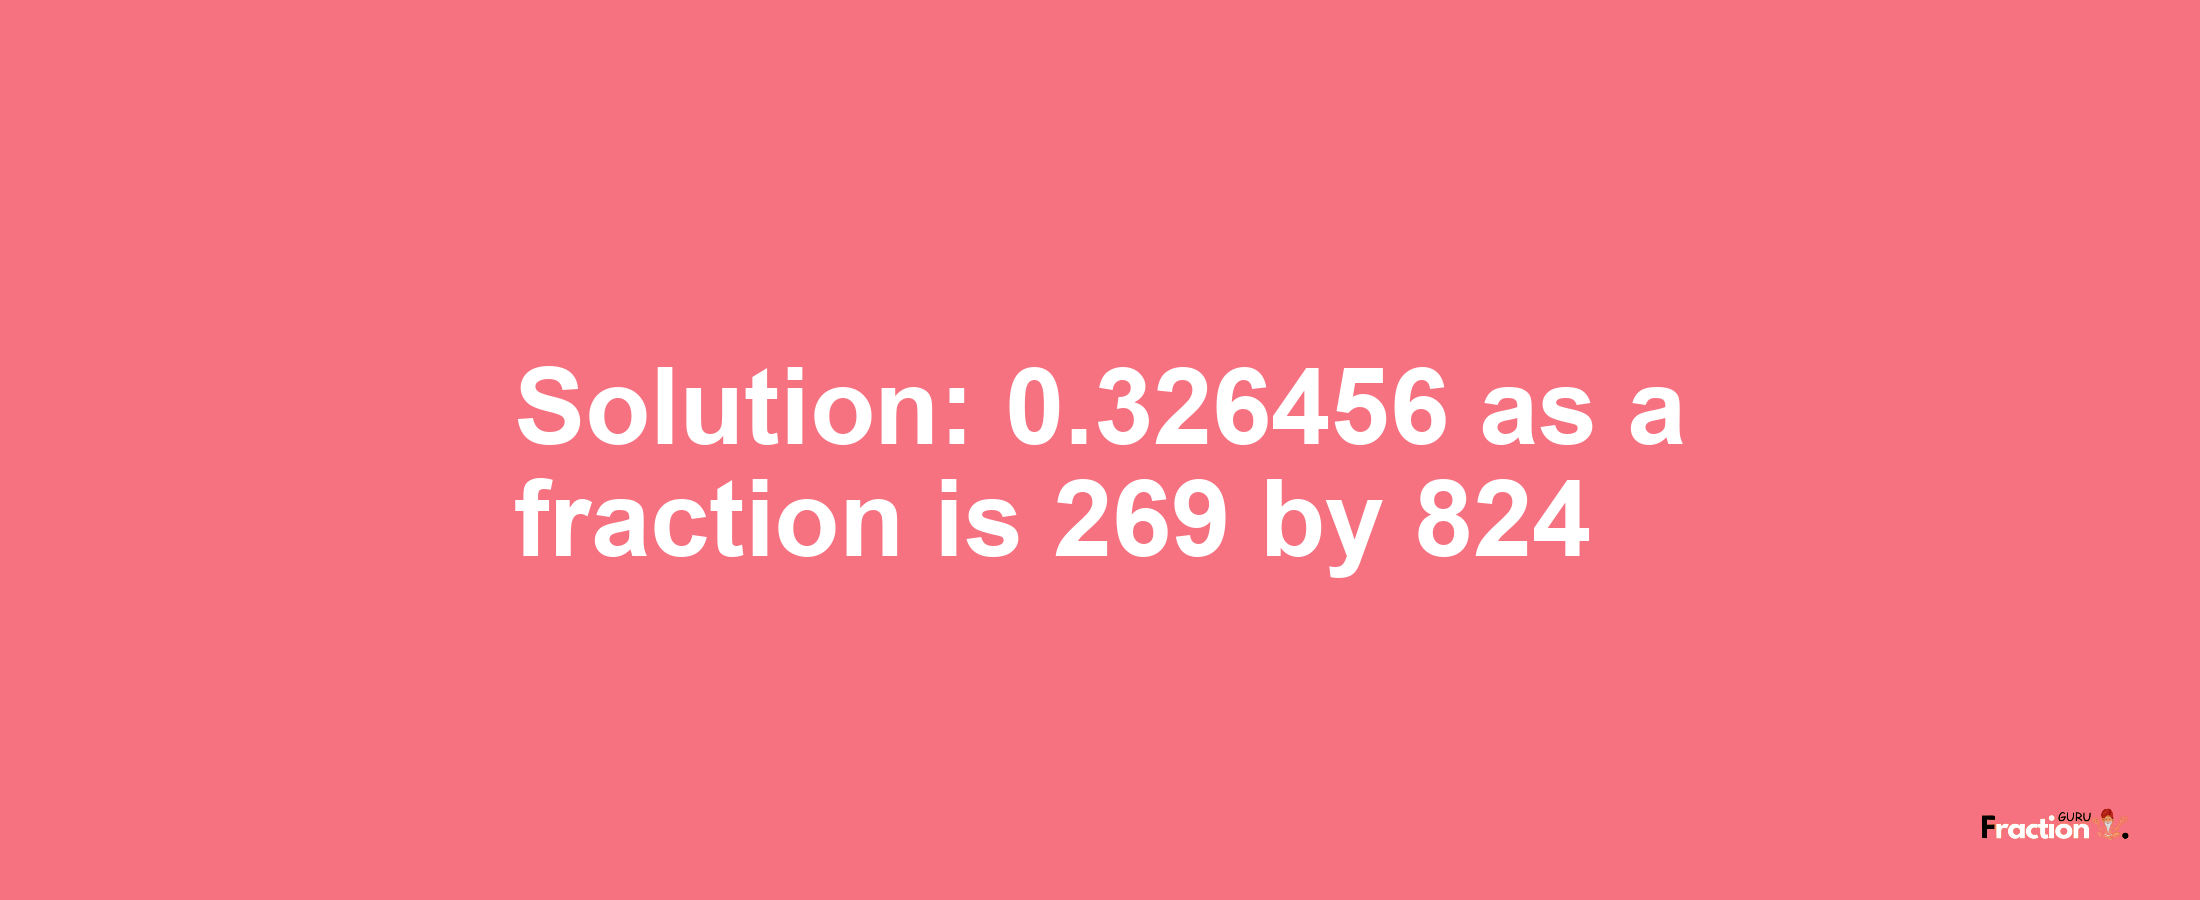 Solution:0.326456 as a fraction is 269/824